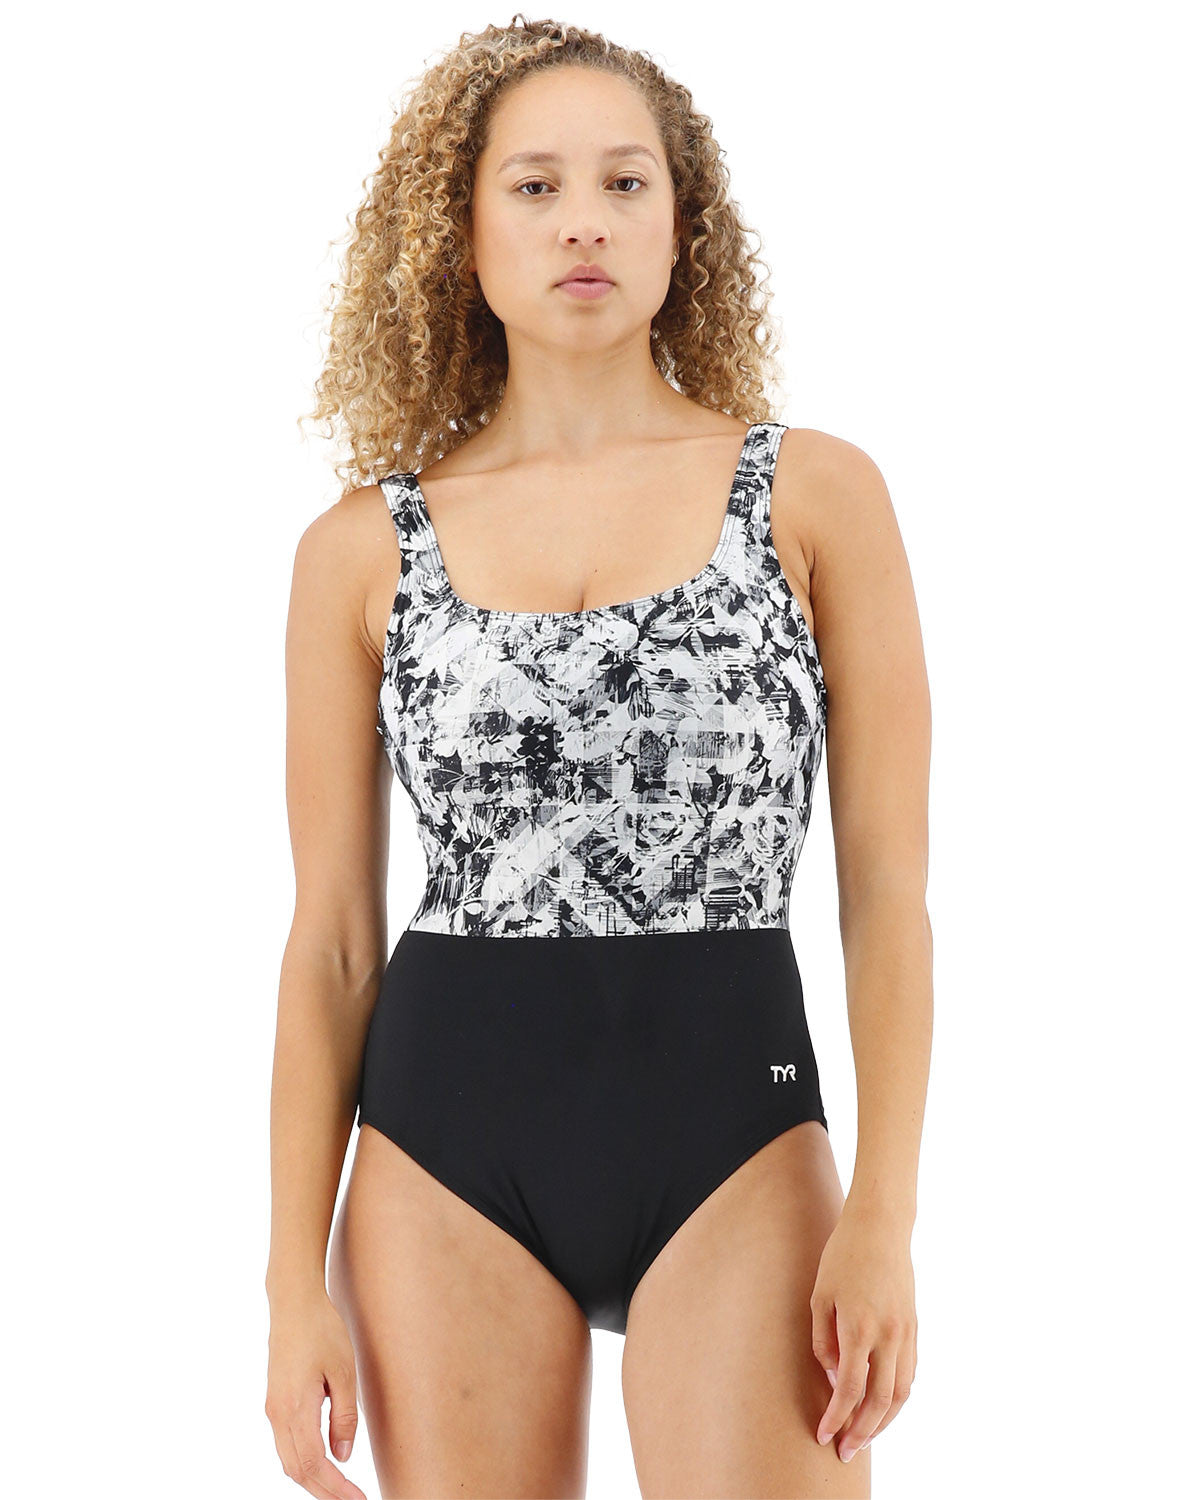 W TYR Lucid Scoop Neck Controlfit Swimsuit – Runners' Choice Kingston